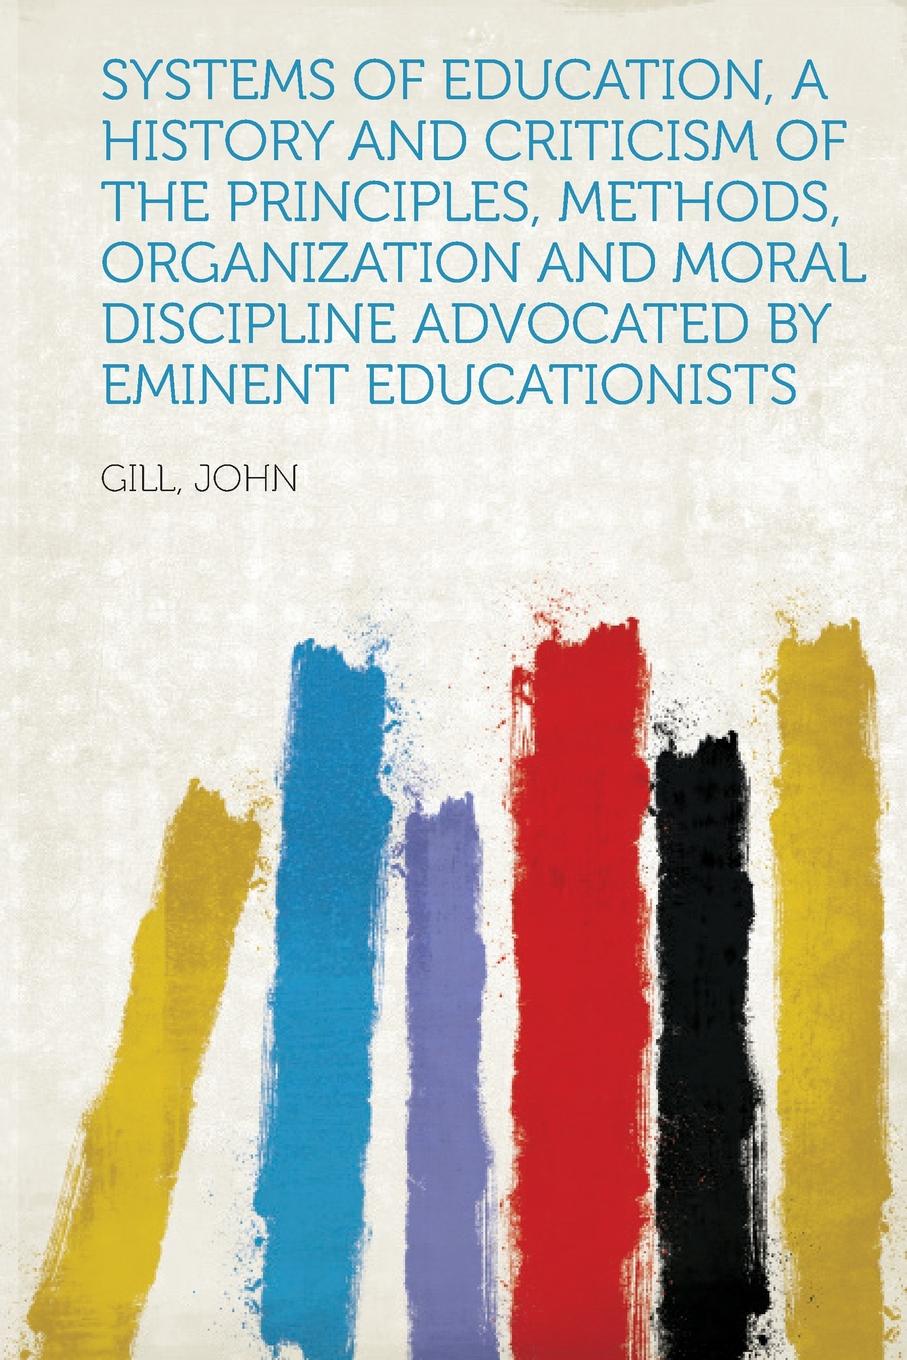 Systems of Education, a History and Criticism of the Principles, Methods, Organization and Moral Discipline Advocated by Eminent Educationists